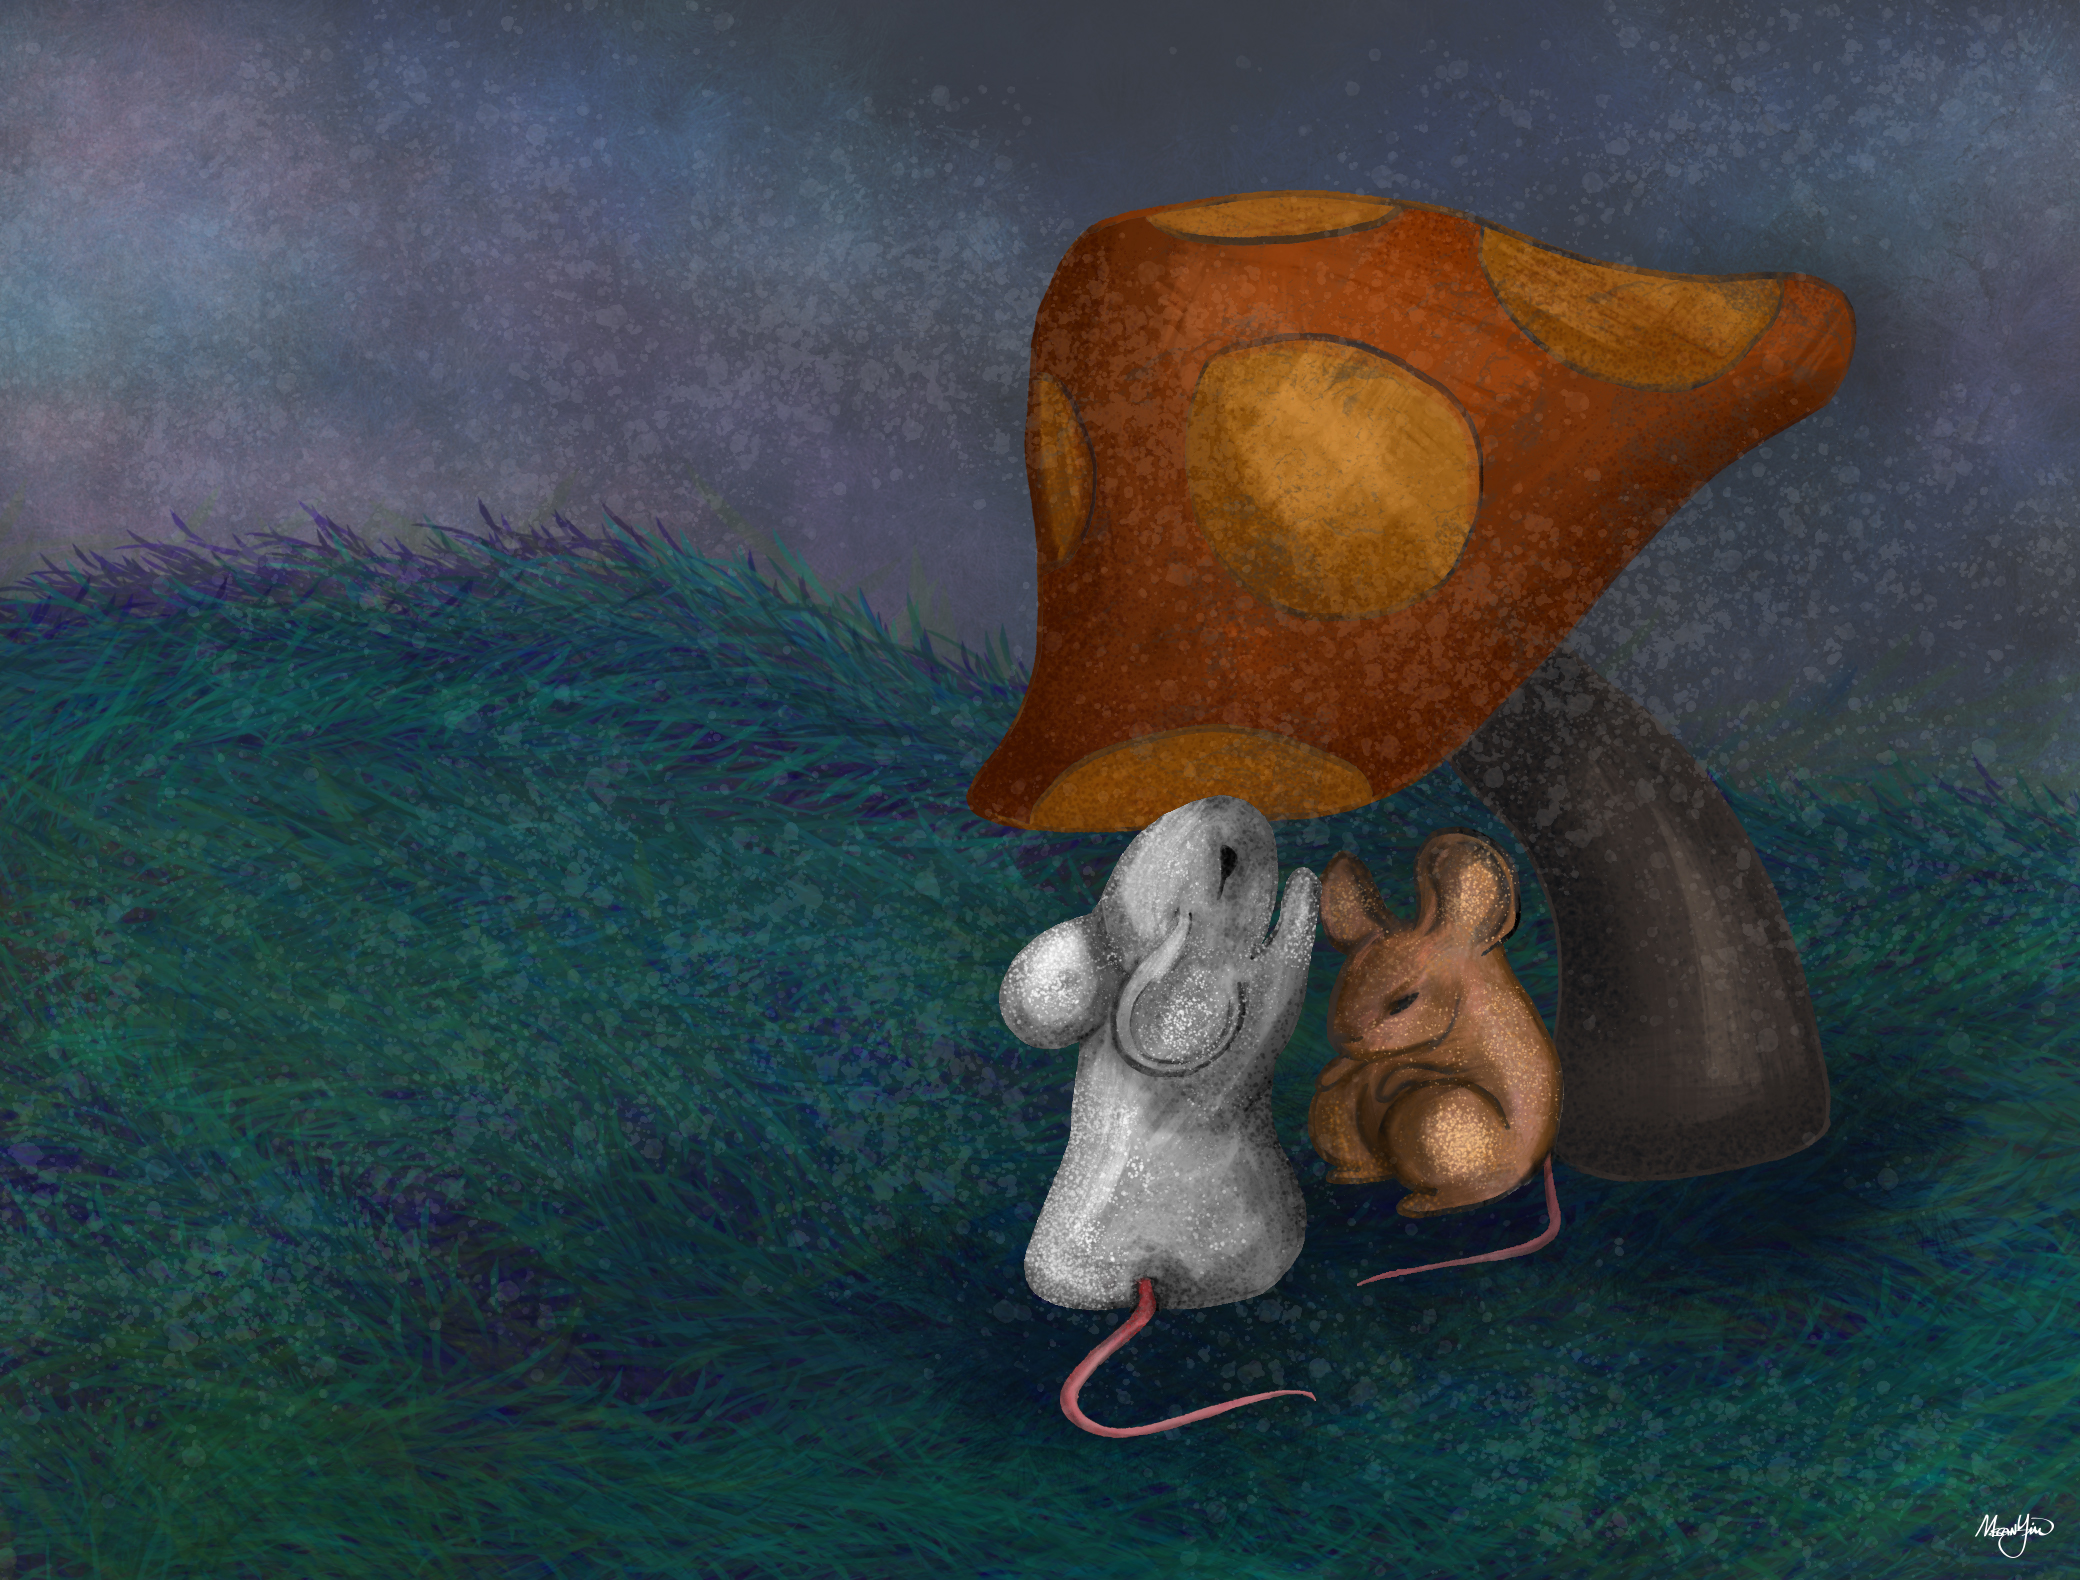 The Mice and the Mushroom